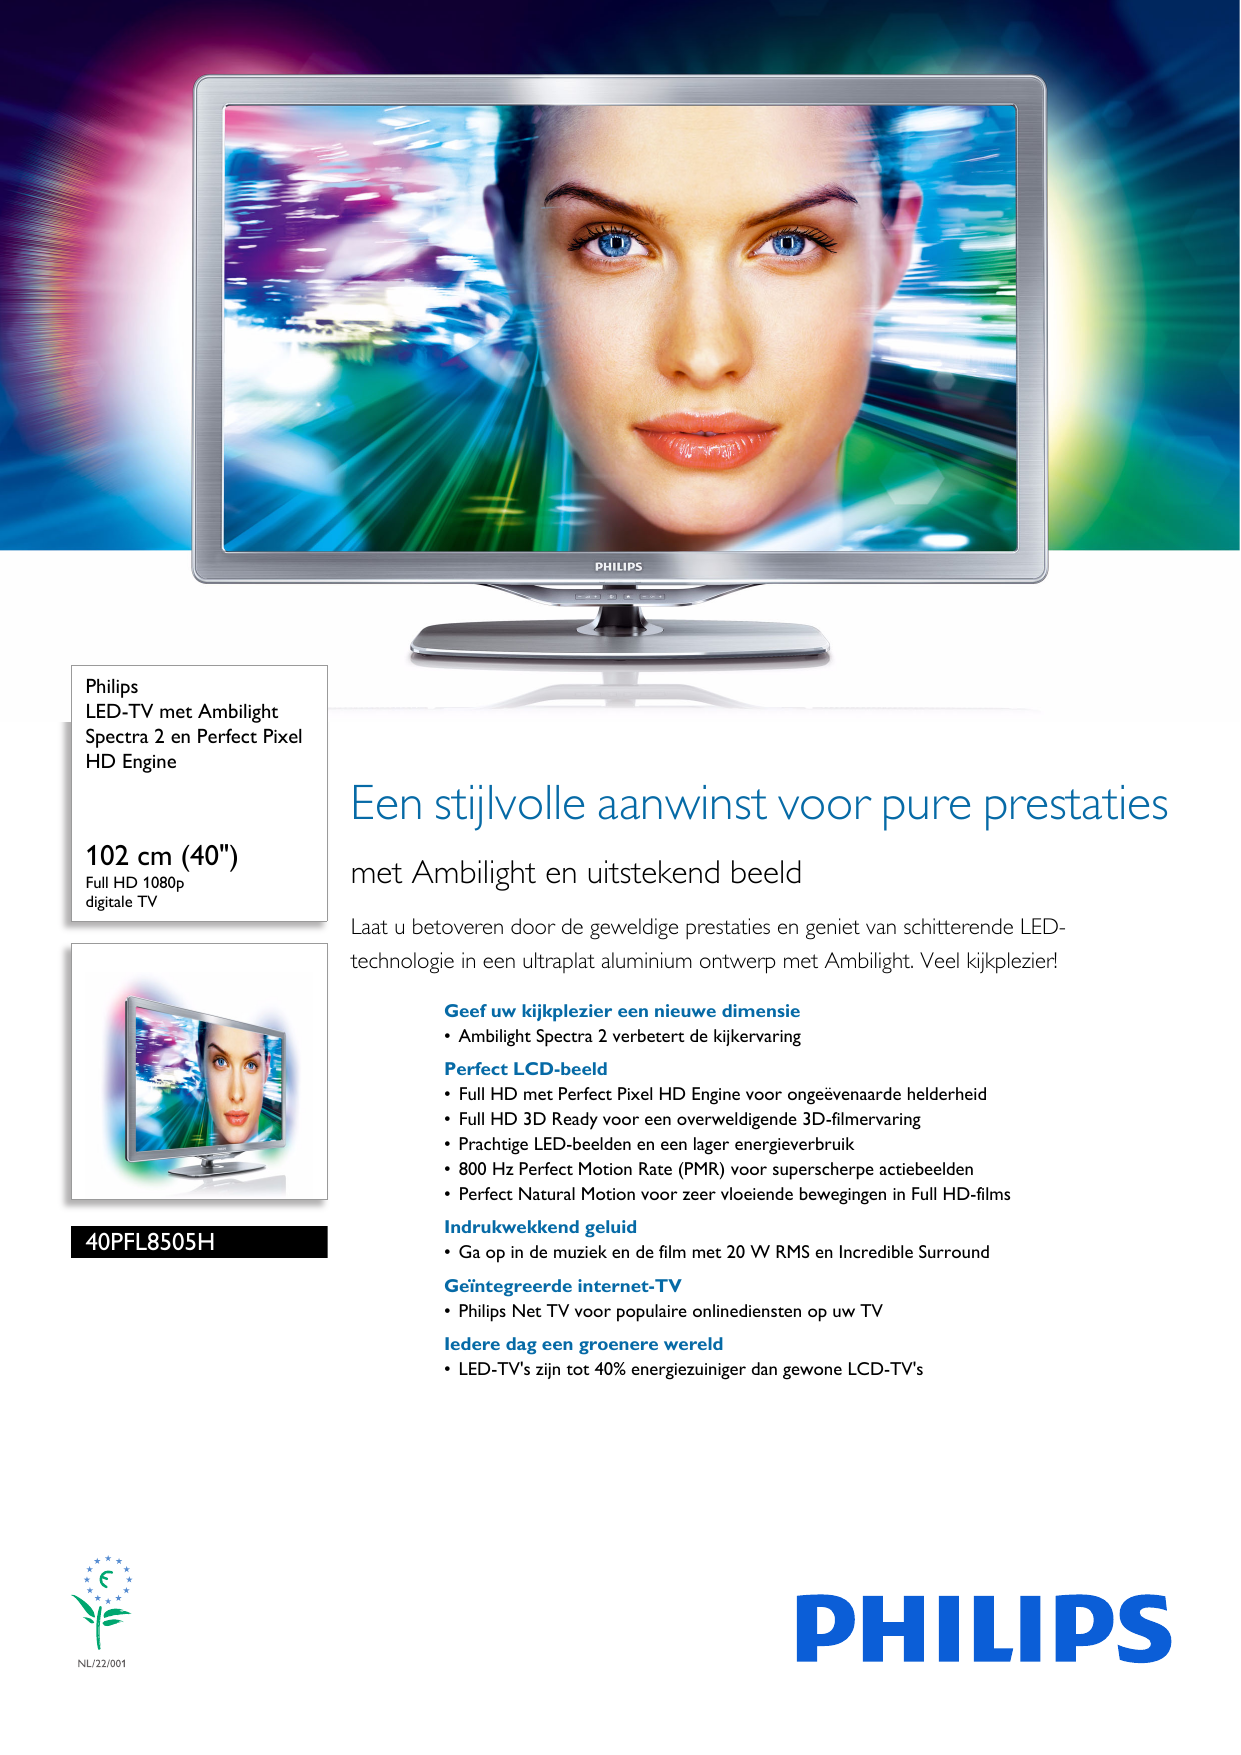 Page 1 of 3 - Philips 40PFL8505H/12 LED-TV Met Ambilight Spectra 2 En Perfect Pixel HD Engine User Manual Brochure 40pfl8505h 12 Pss Nldnl